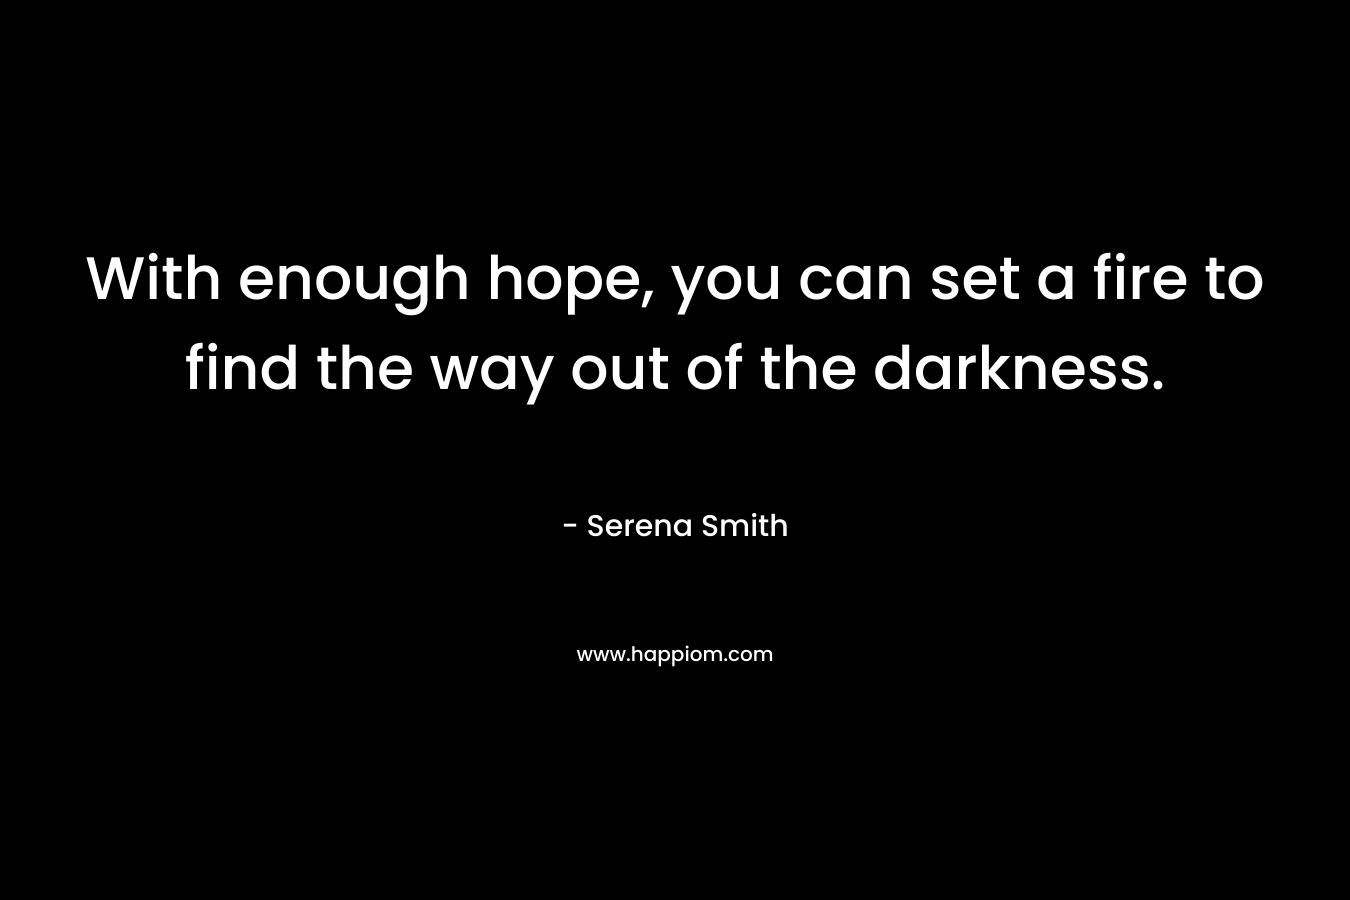 With enough hope, you can set a fire to find the way out of the darkness.